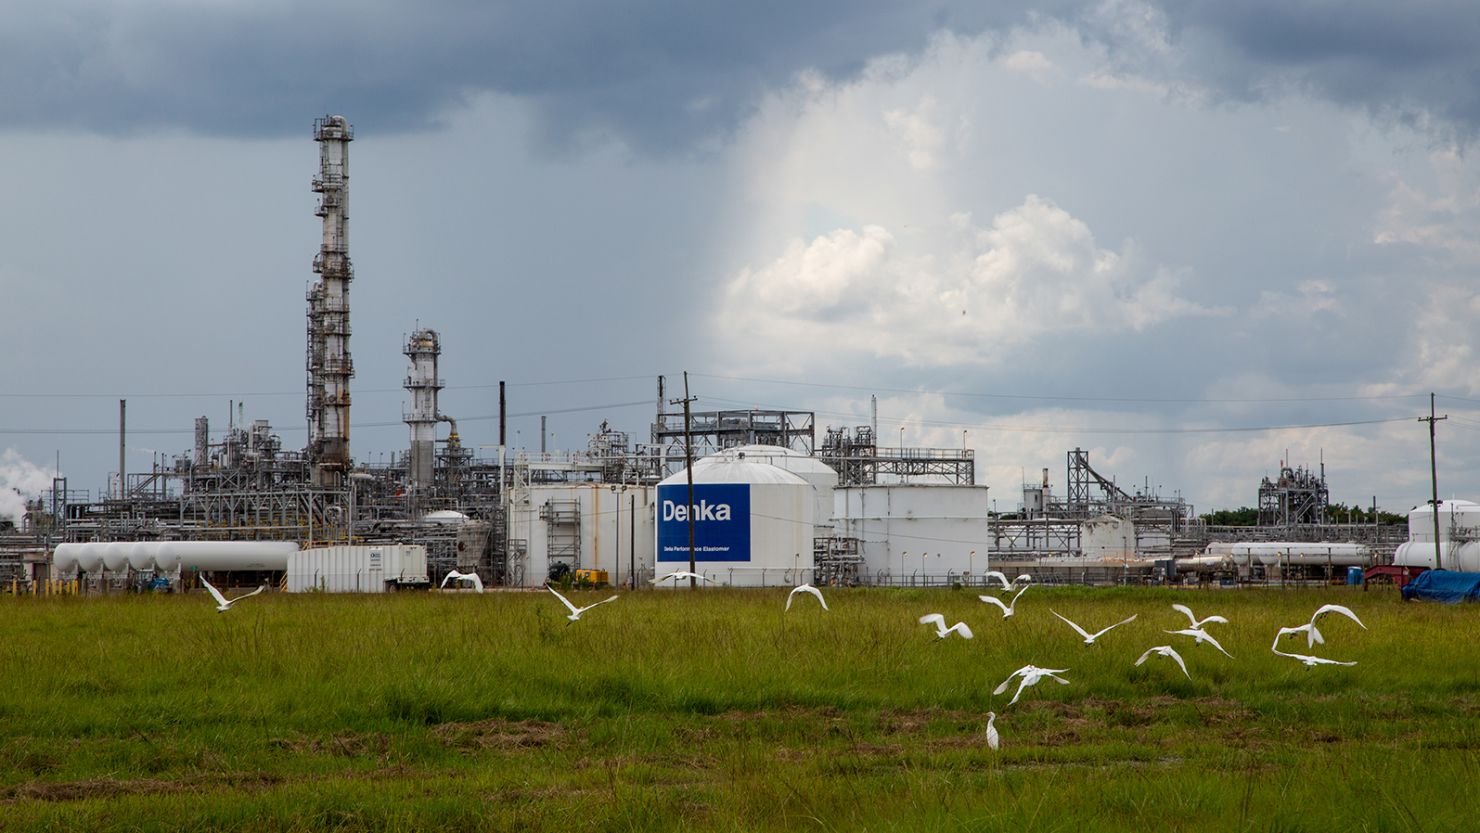 A DuPont Denka chemical plant in LaPlace, Louisiana, is under scrutiny from the EPA over air pollution concerns.